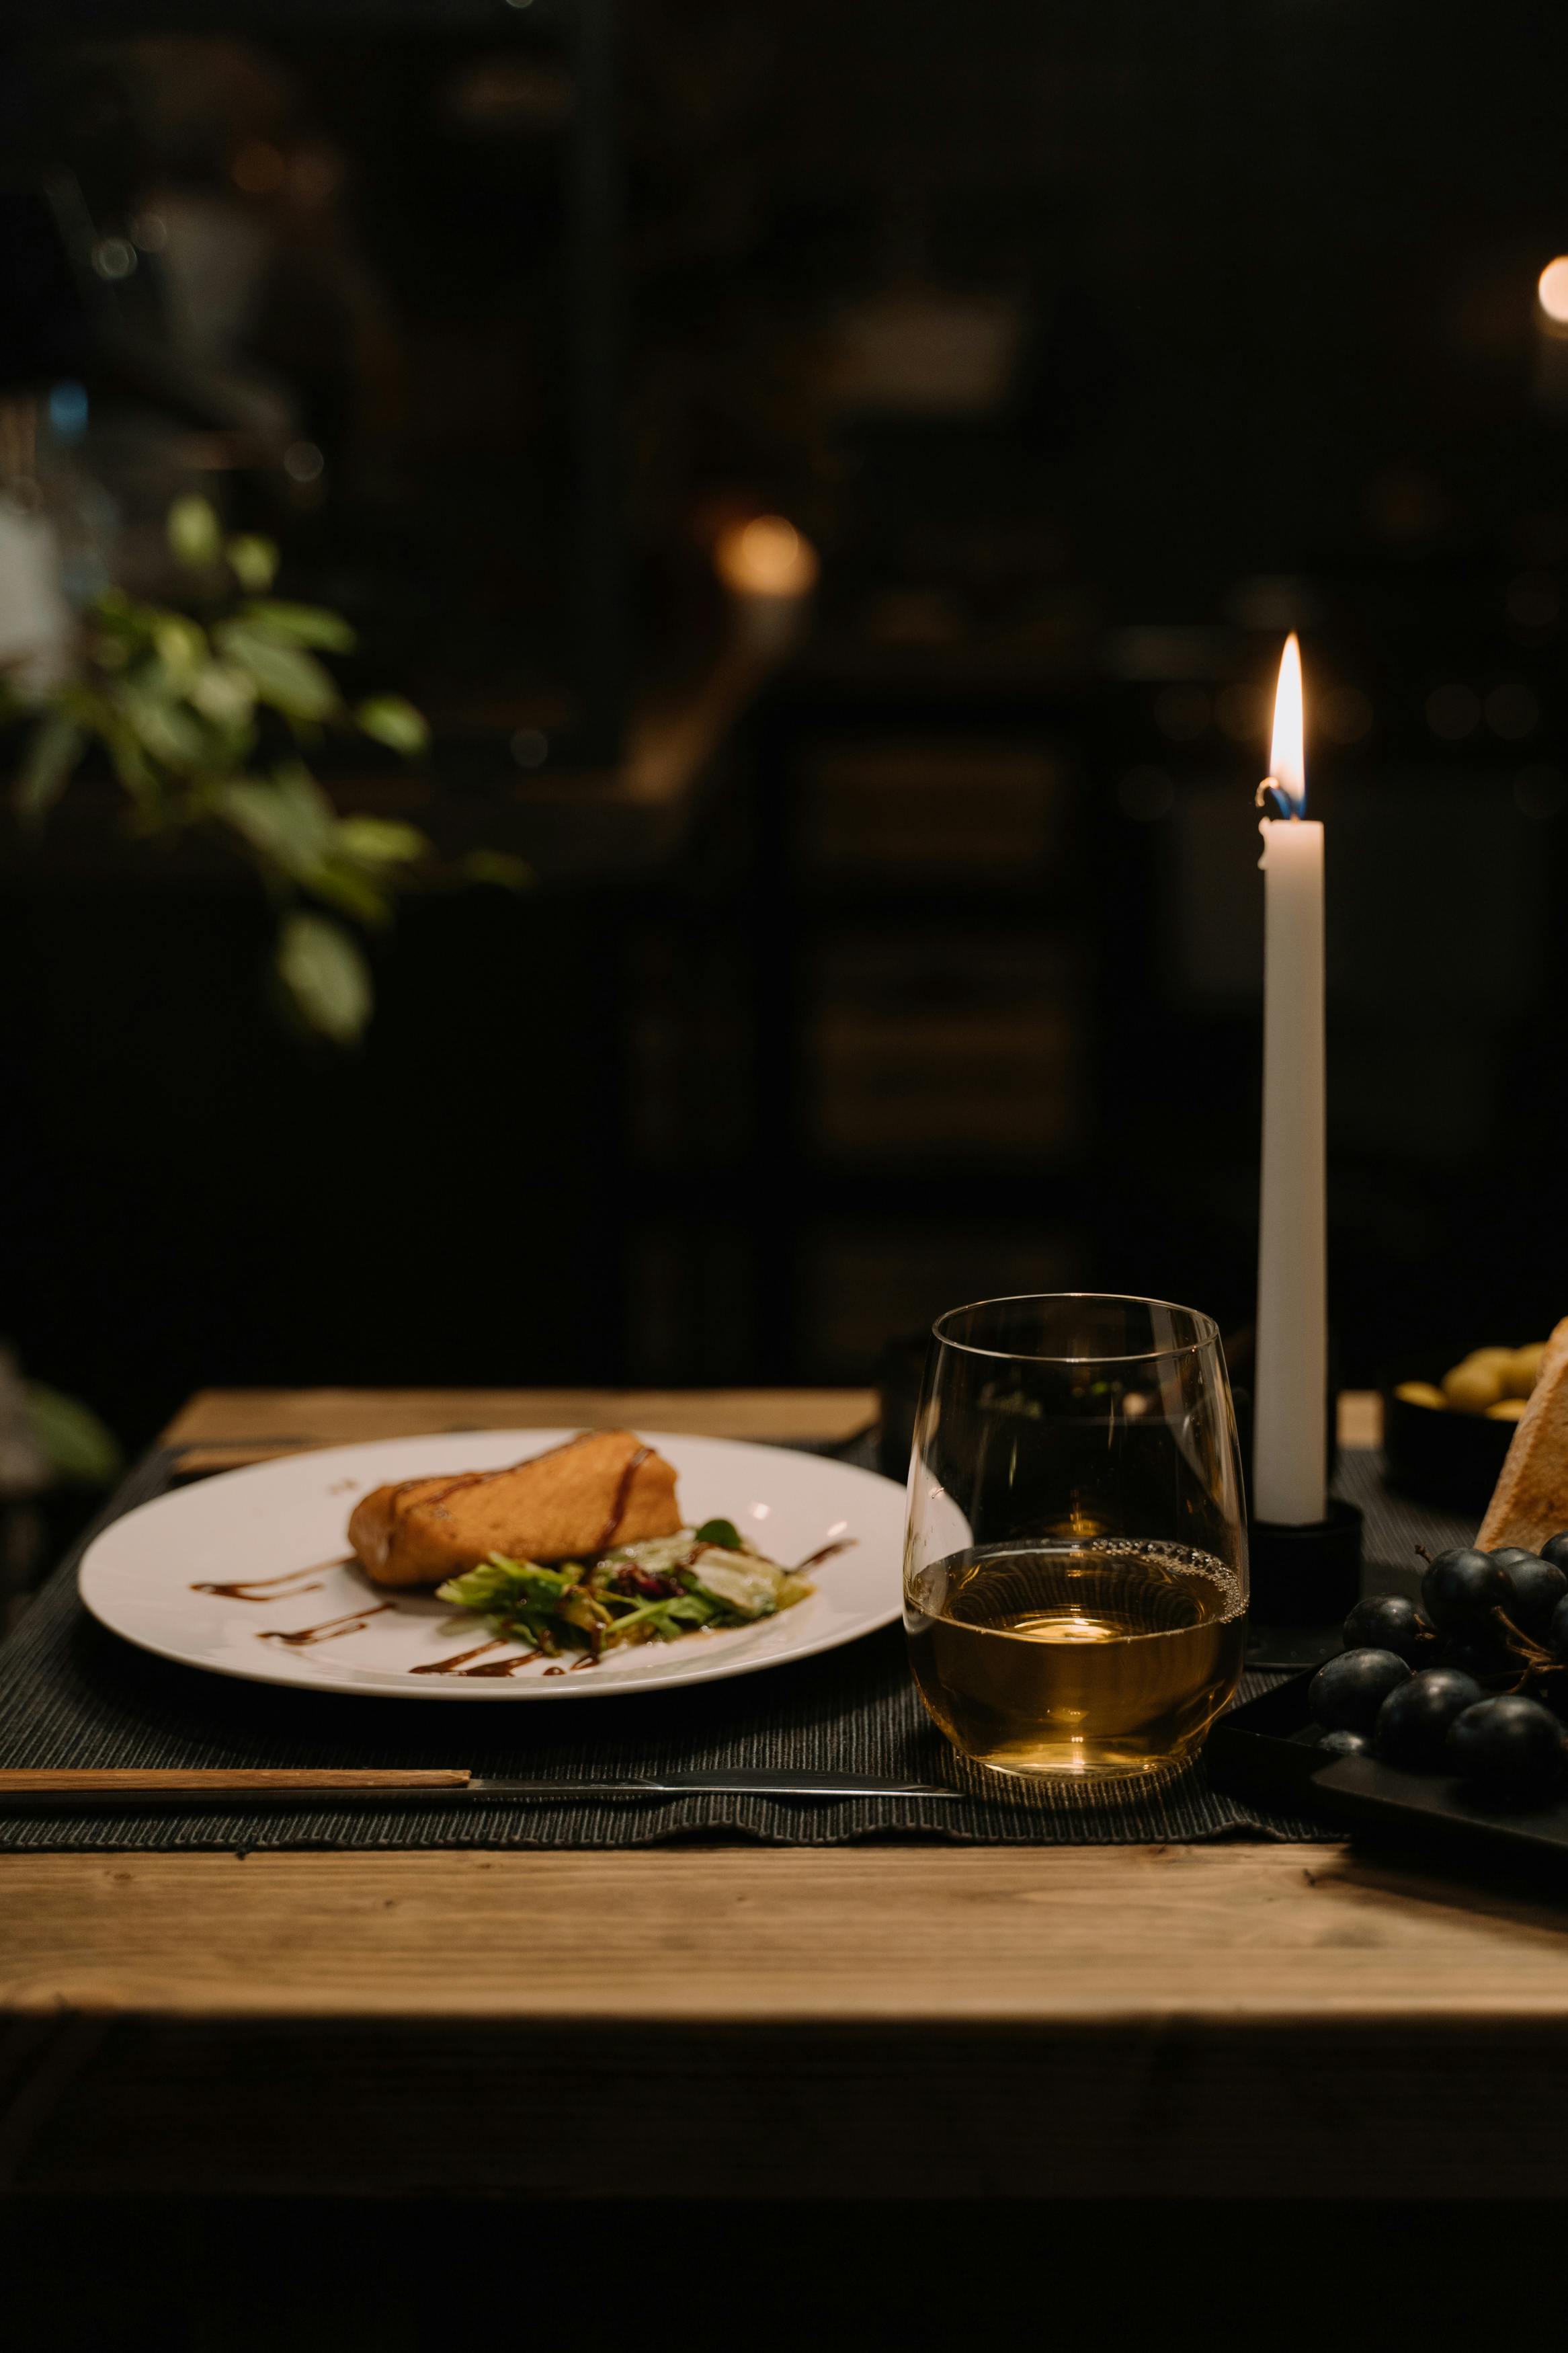 Candlelight Dinner Photos, Download The BEST Free Candlelight Dinner ...